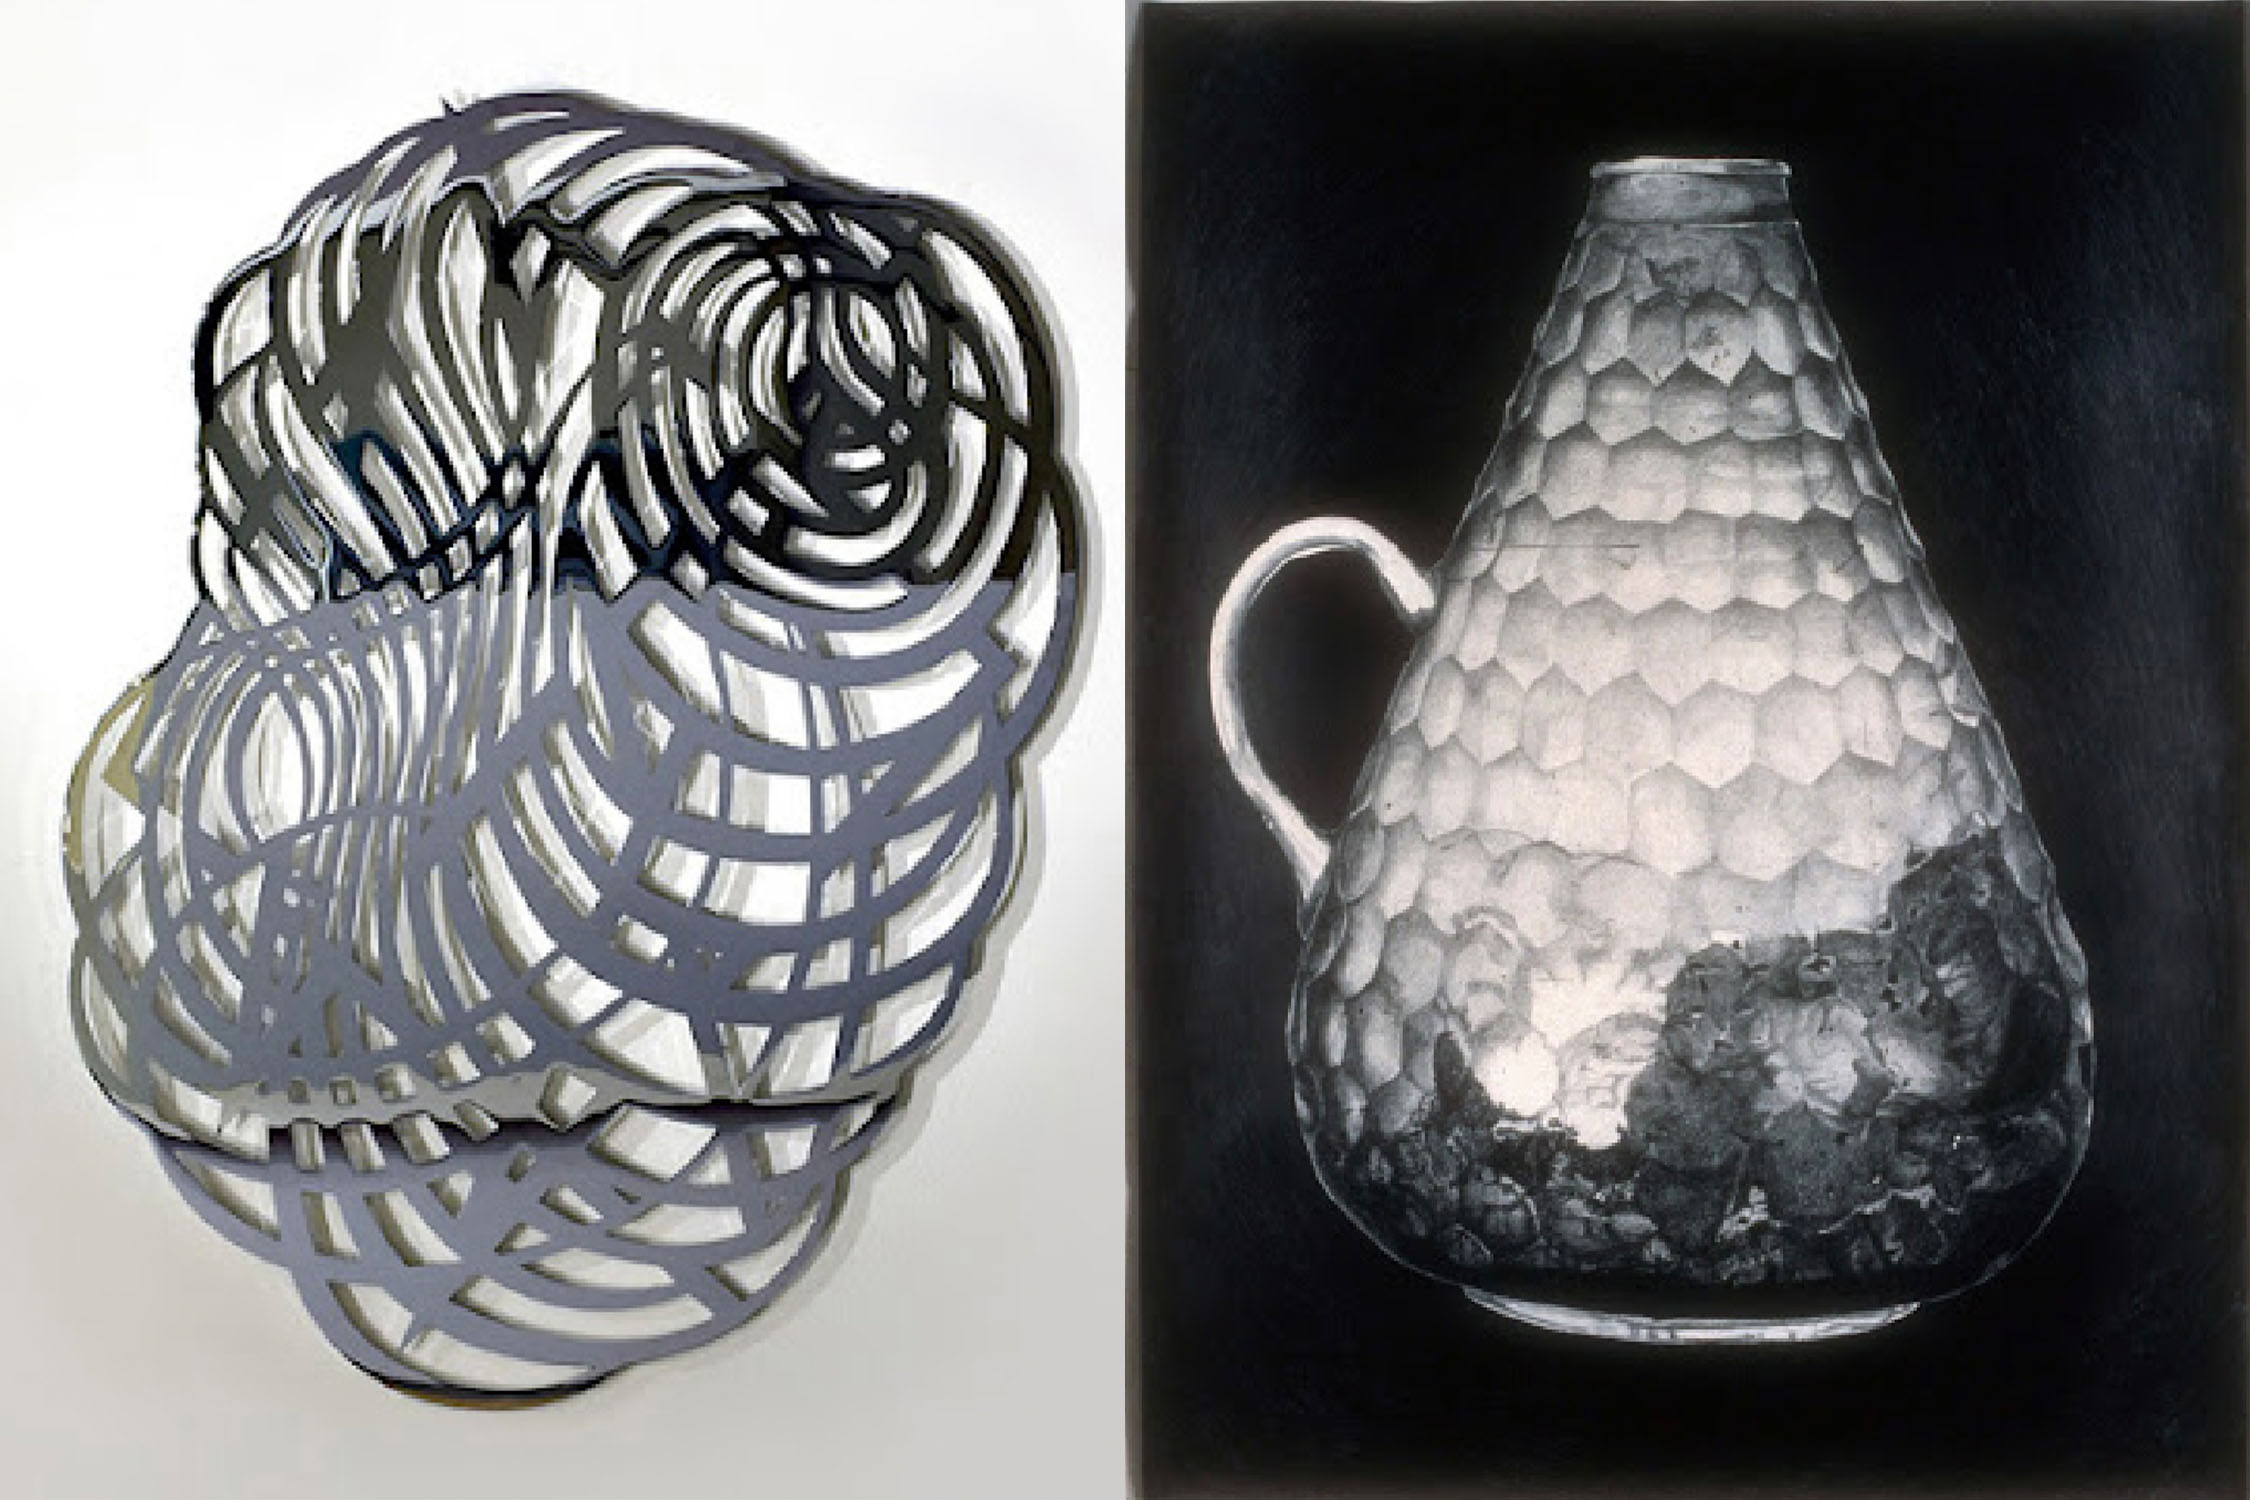 Two of the items on display in "Finding&colon; Works by Linda Fleming" are&comma; from left&comma; Heat Lightening &lpar;chromed steel from 2016&rpar; and Faceted Jug &lpar;graphite on rag paper from 1989&rpar;&period;